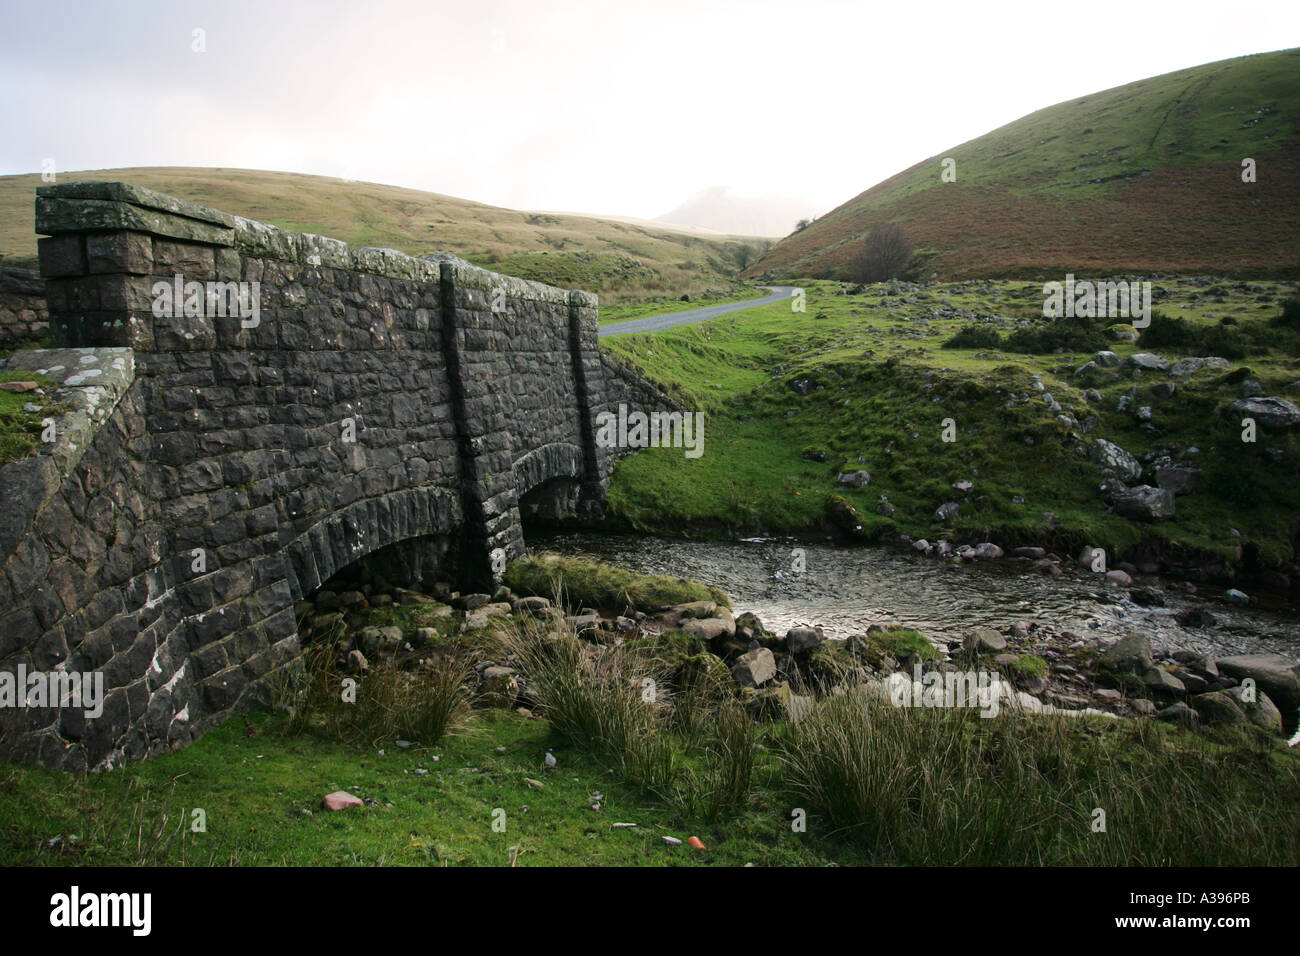 Ancient stone bridge and stream in lush green valley near Llyn y Fan Fach lake in Brecon beacons National Park Mid Wales UK Stock Photo